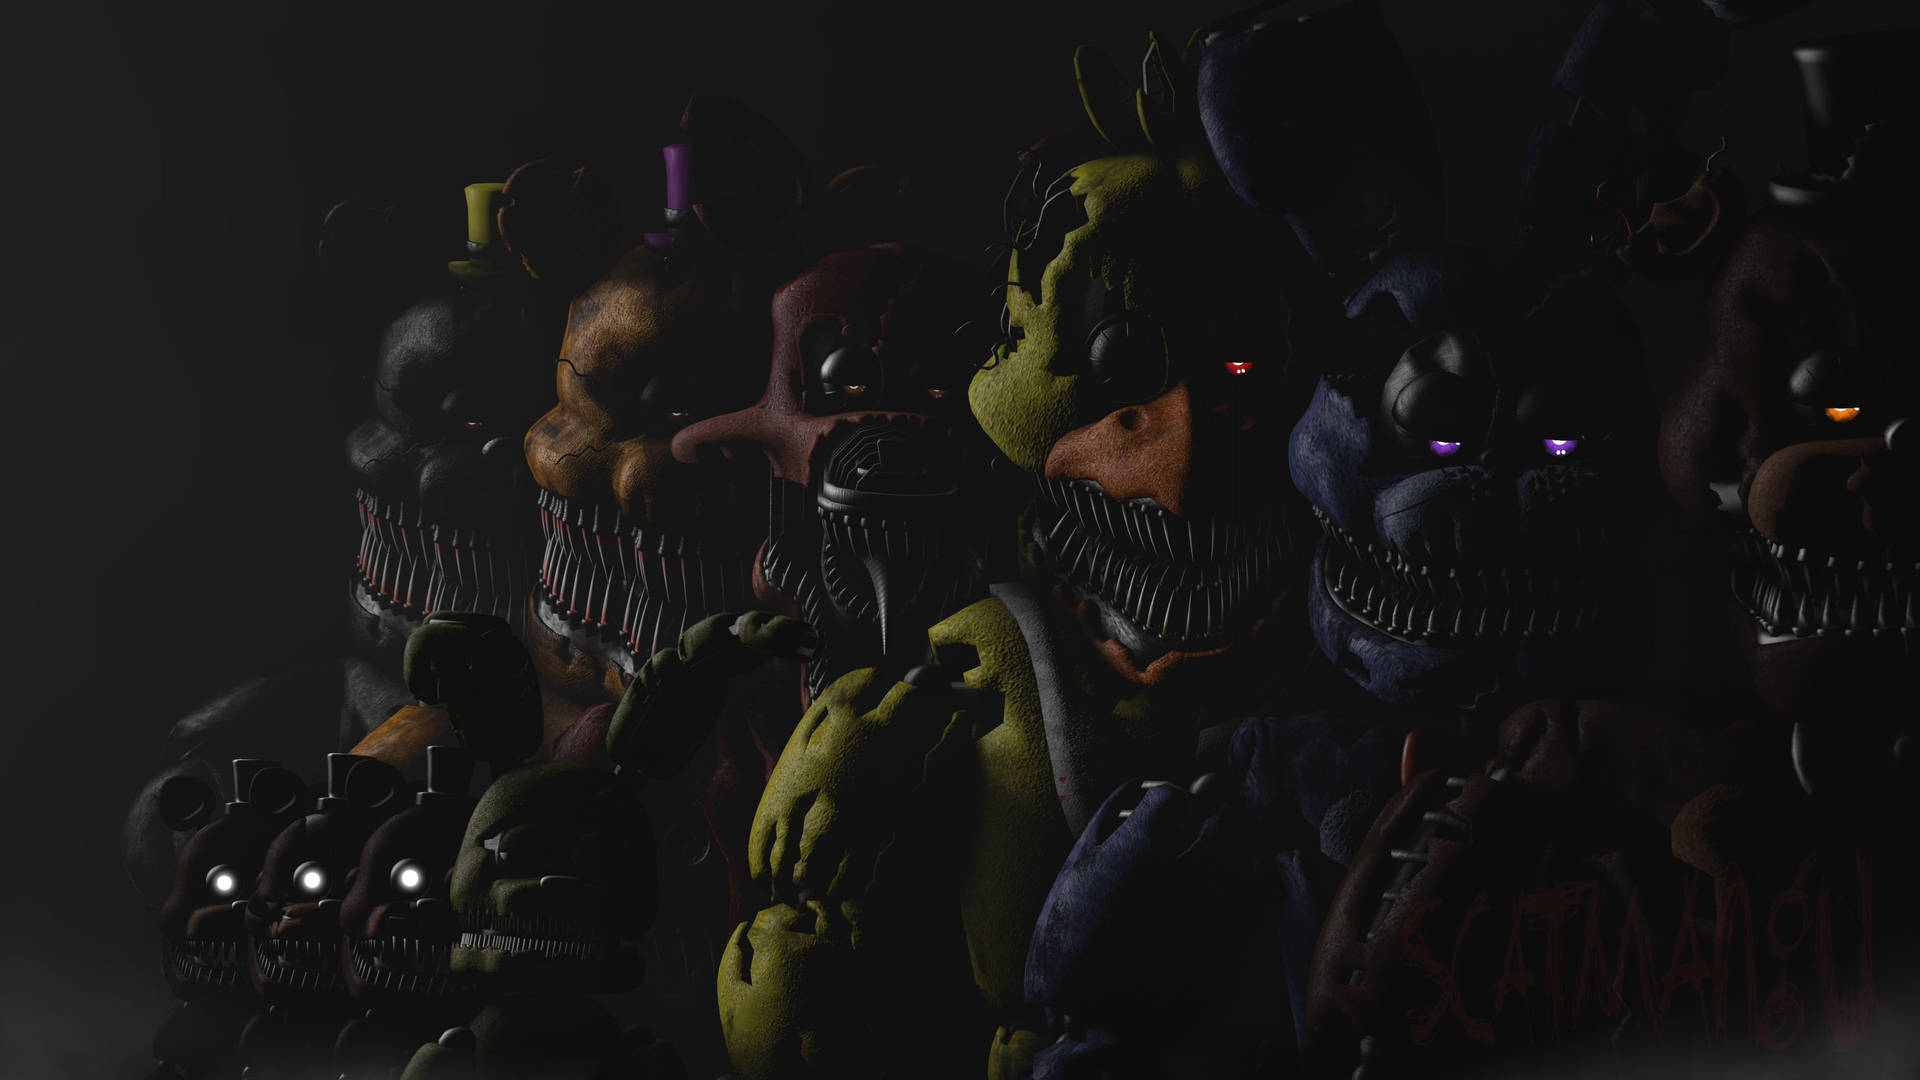 Top 999+ Five Nights At Freddys Security Breach Wallpaper Full HD, 4K✅Free to Use